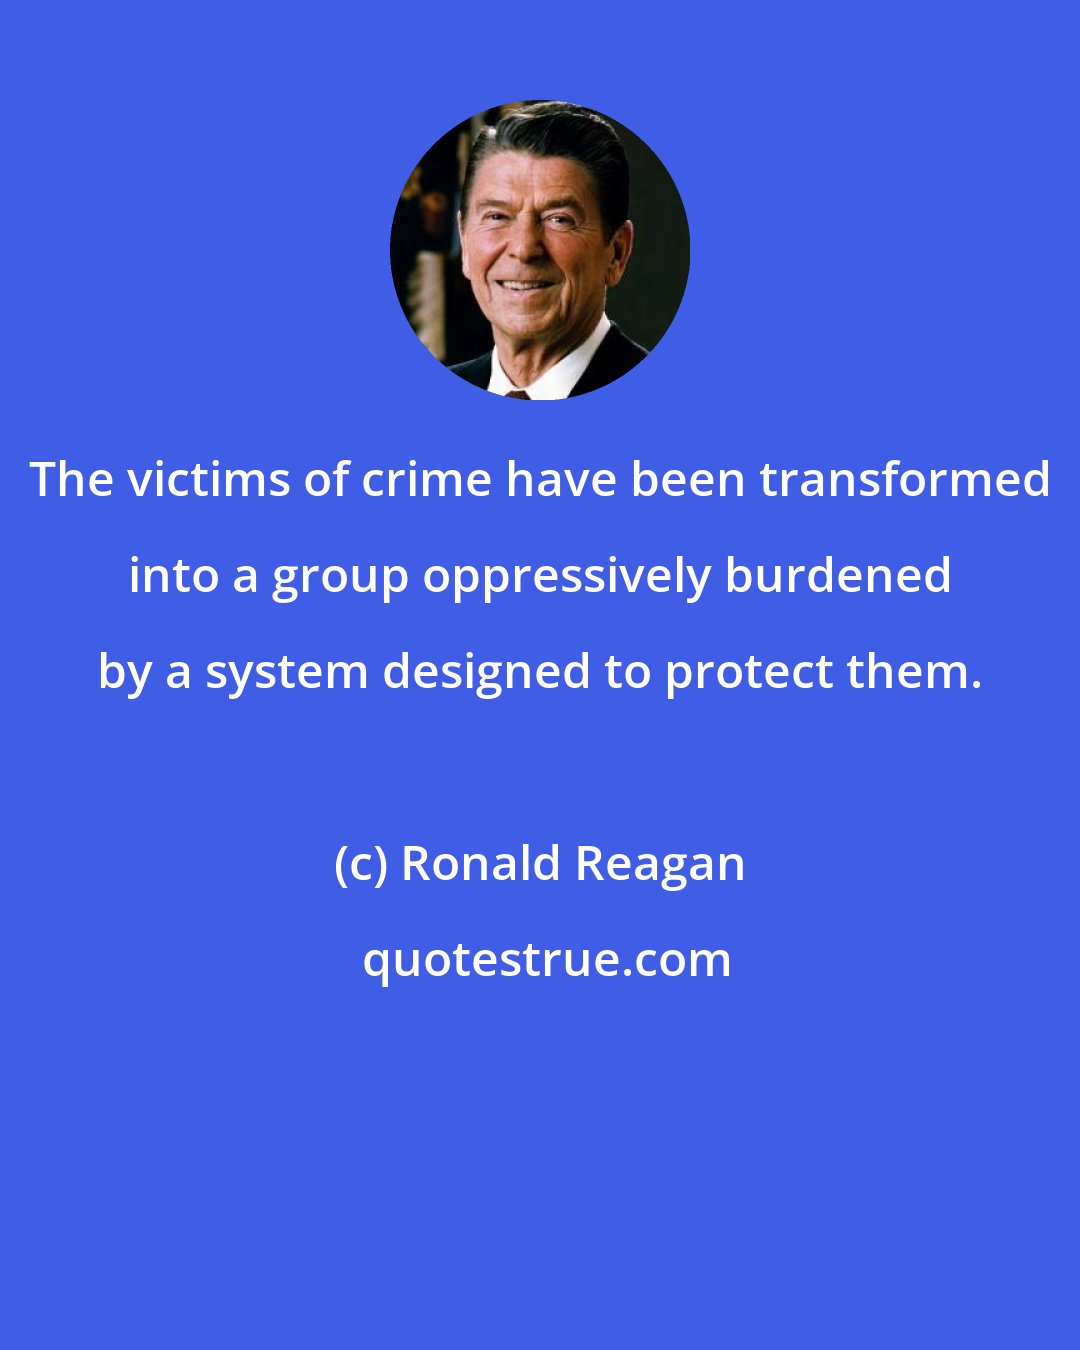 Ronald Reagan: The victims of crime have been transformed into a group oppressively burdened by a system designed to protect them.